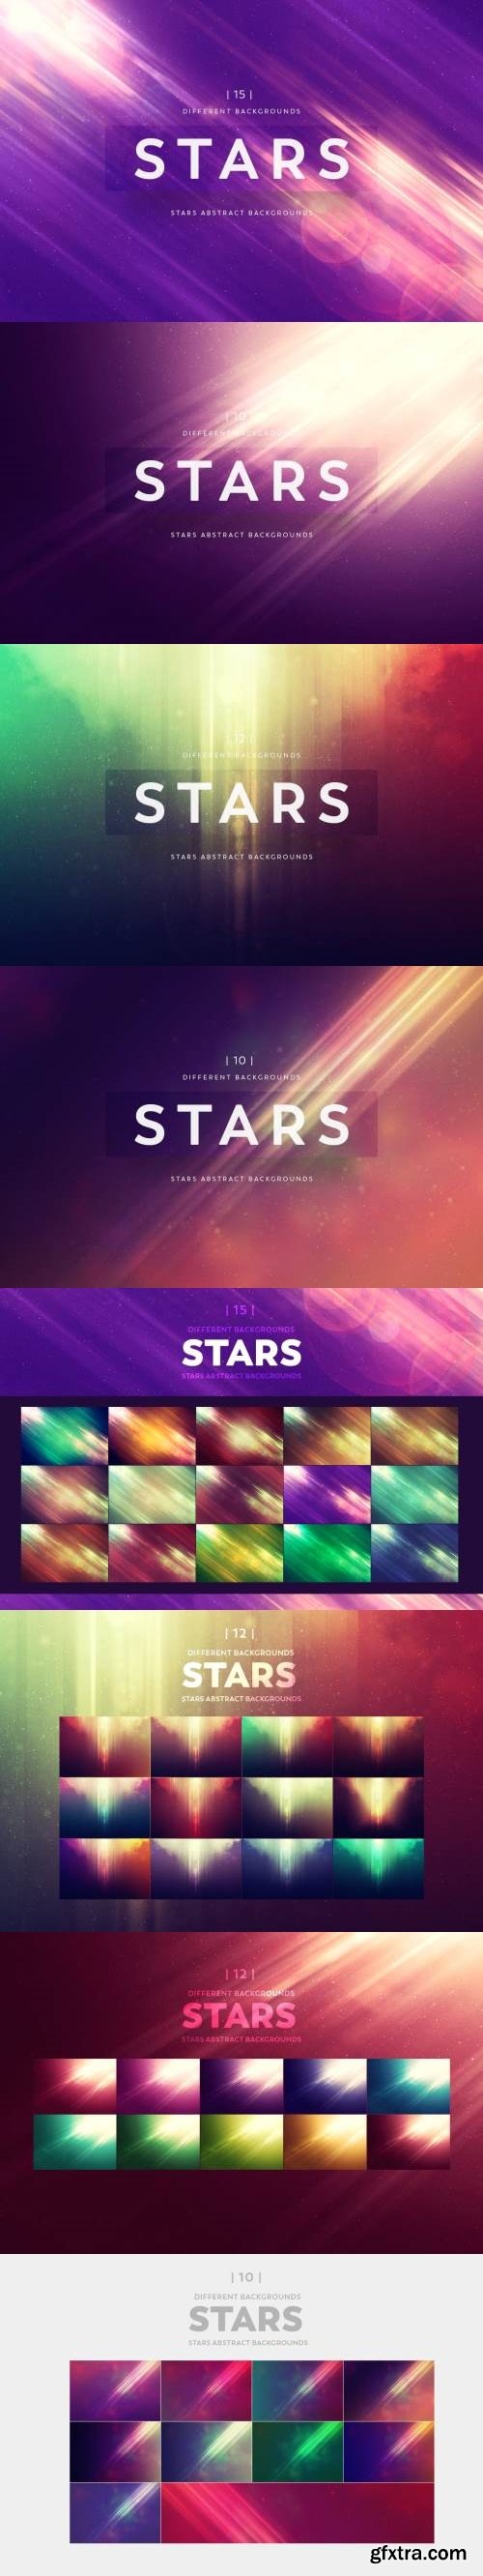 Stars Light Abstract Backgrounds Bundle